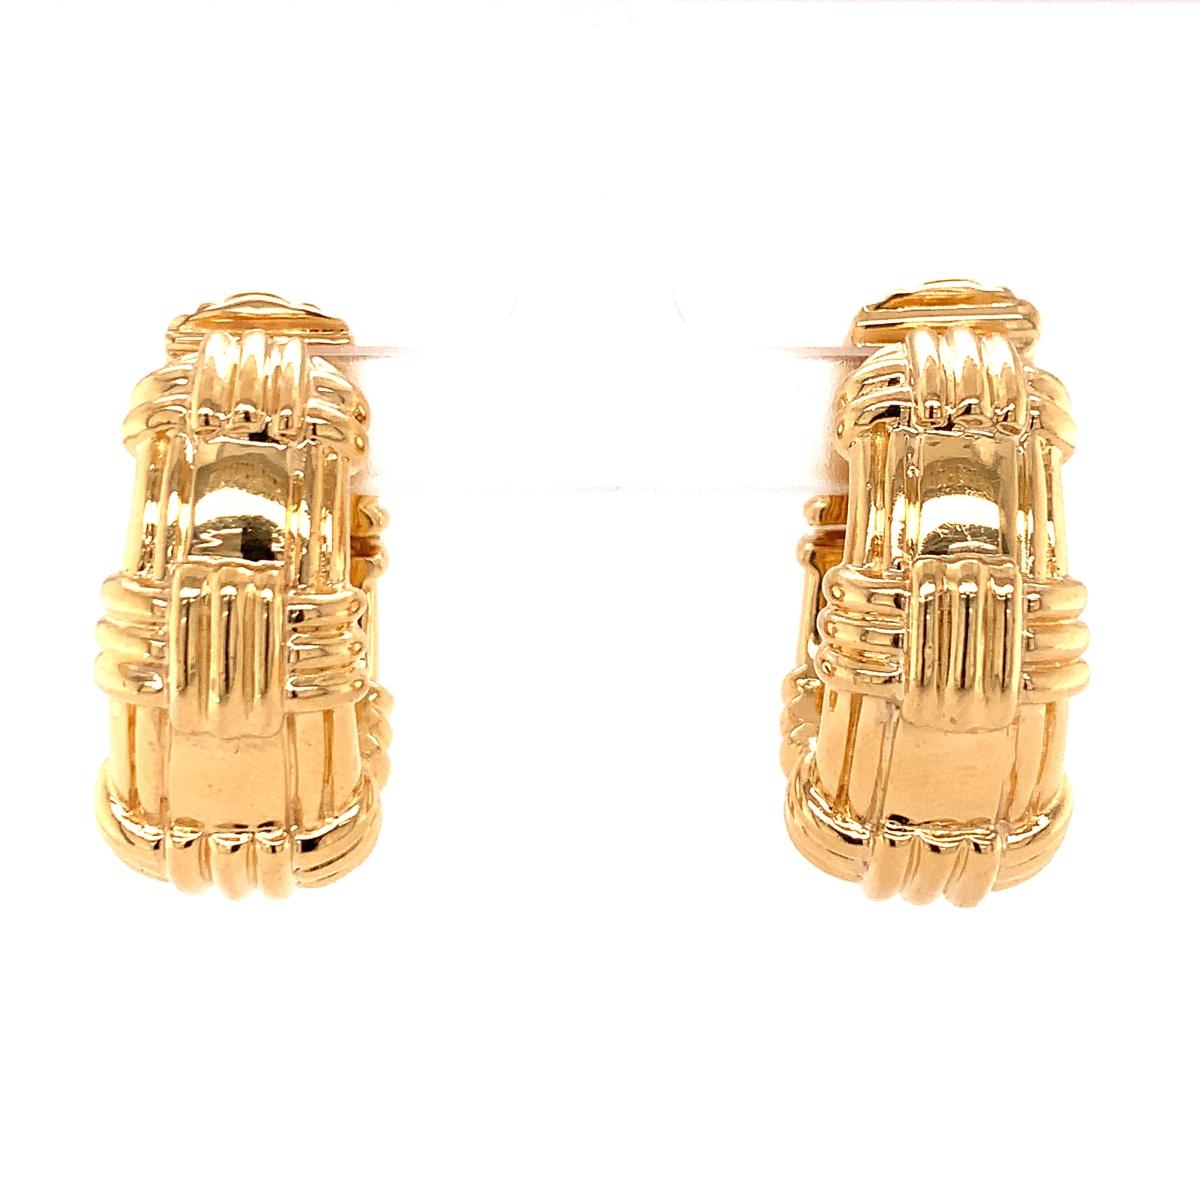 Huggie 18k Yellow Gold Earrings by David Webb, circa 1970s In Good Condition For Sale In Beverly Hills, CA